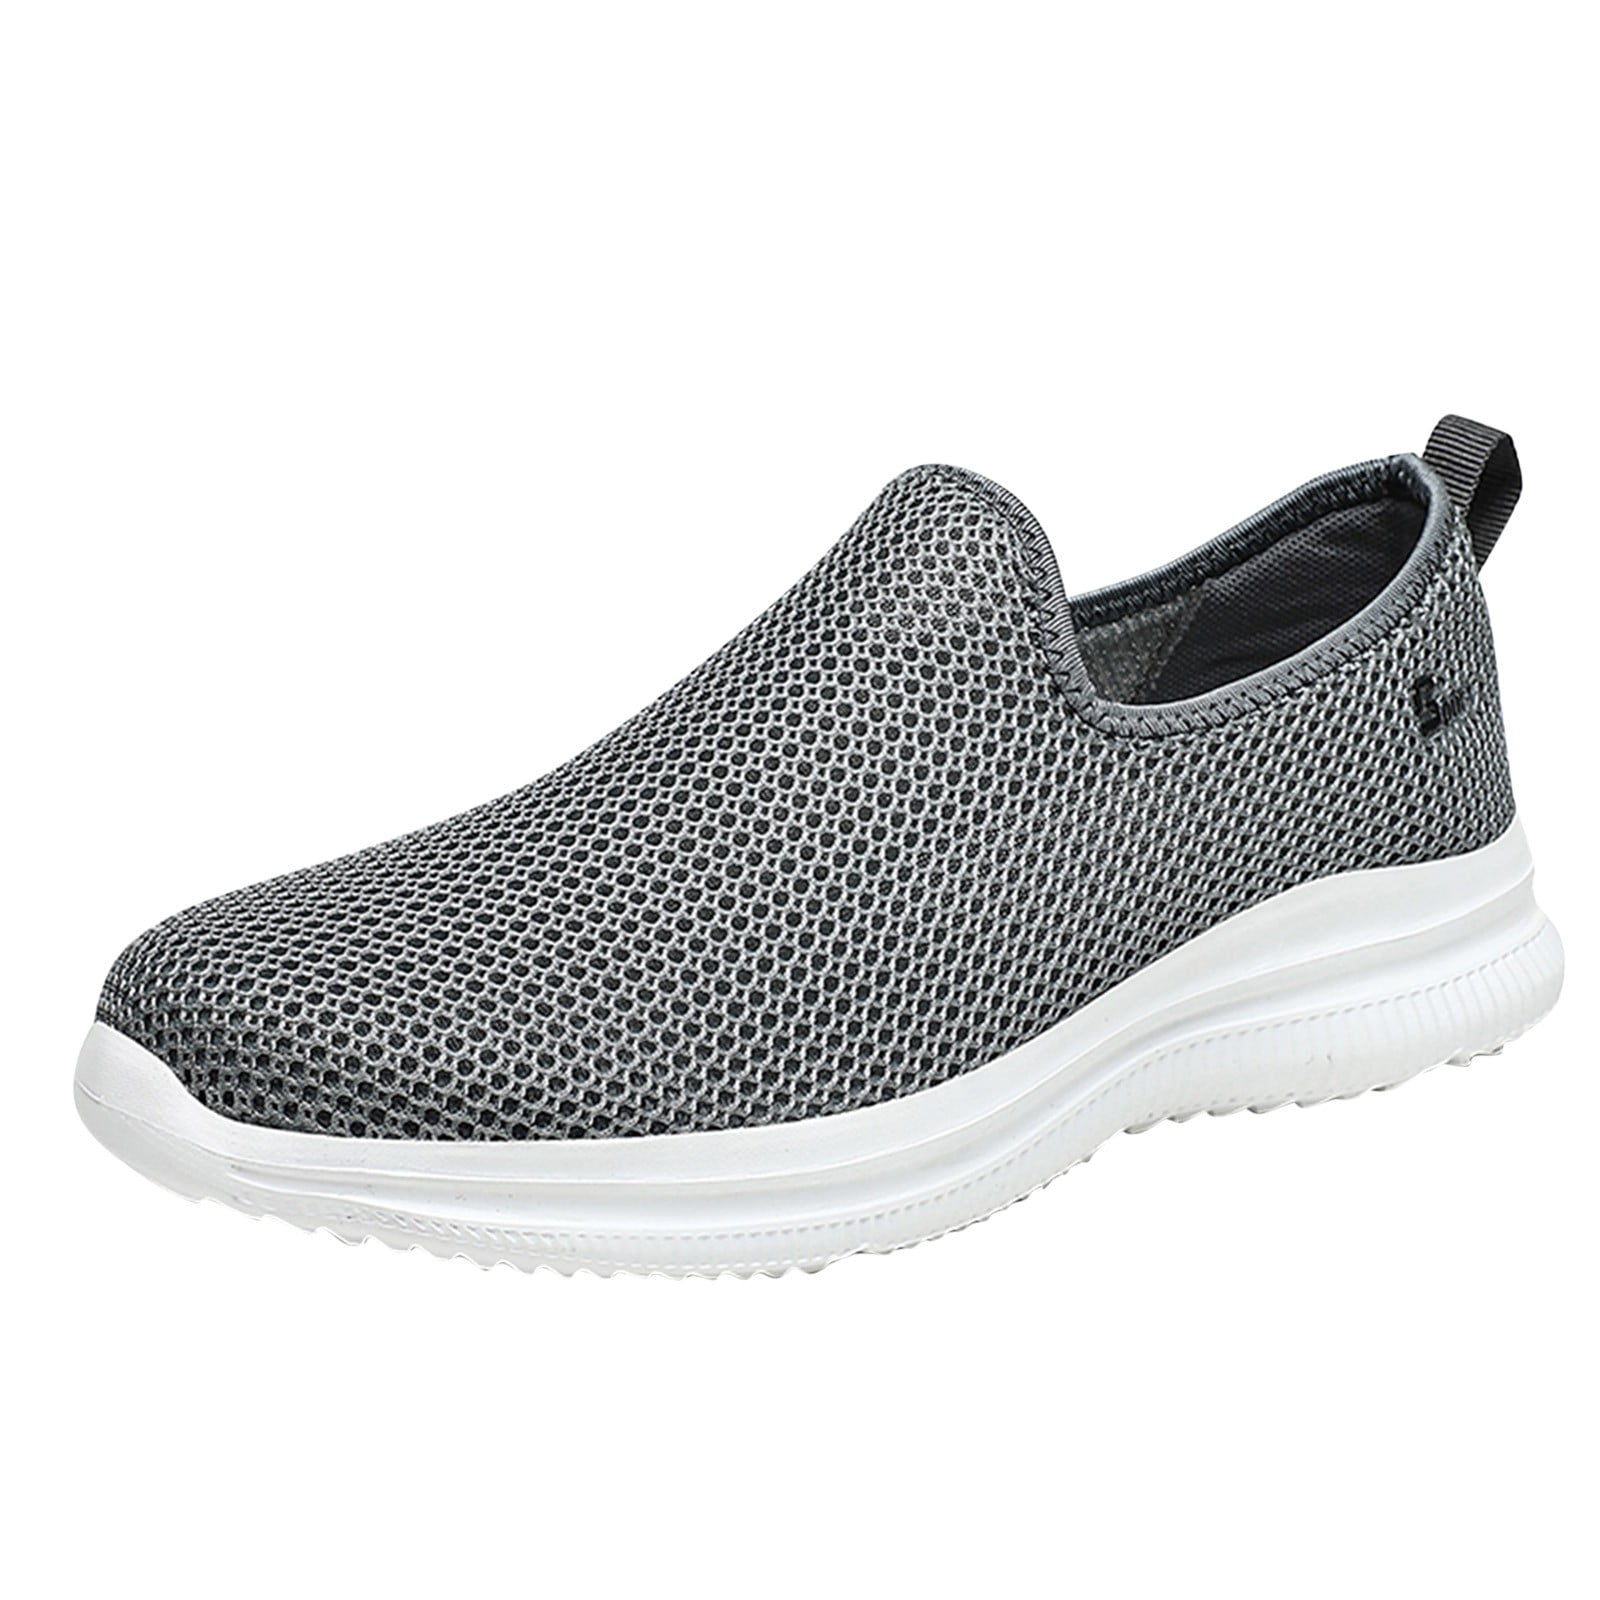 WANYNG Fashion Summer Women Sneakers Mesh Breathable Slip On ...